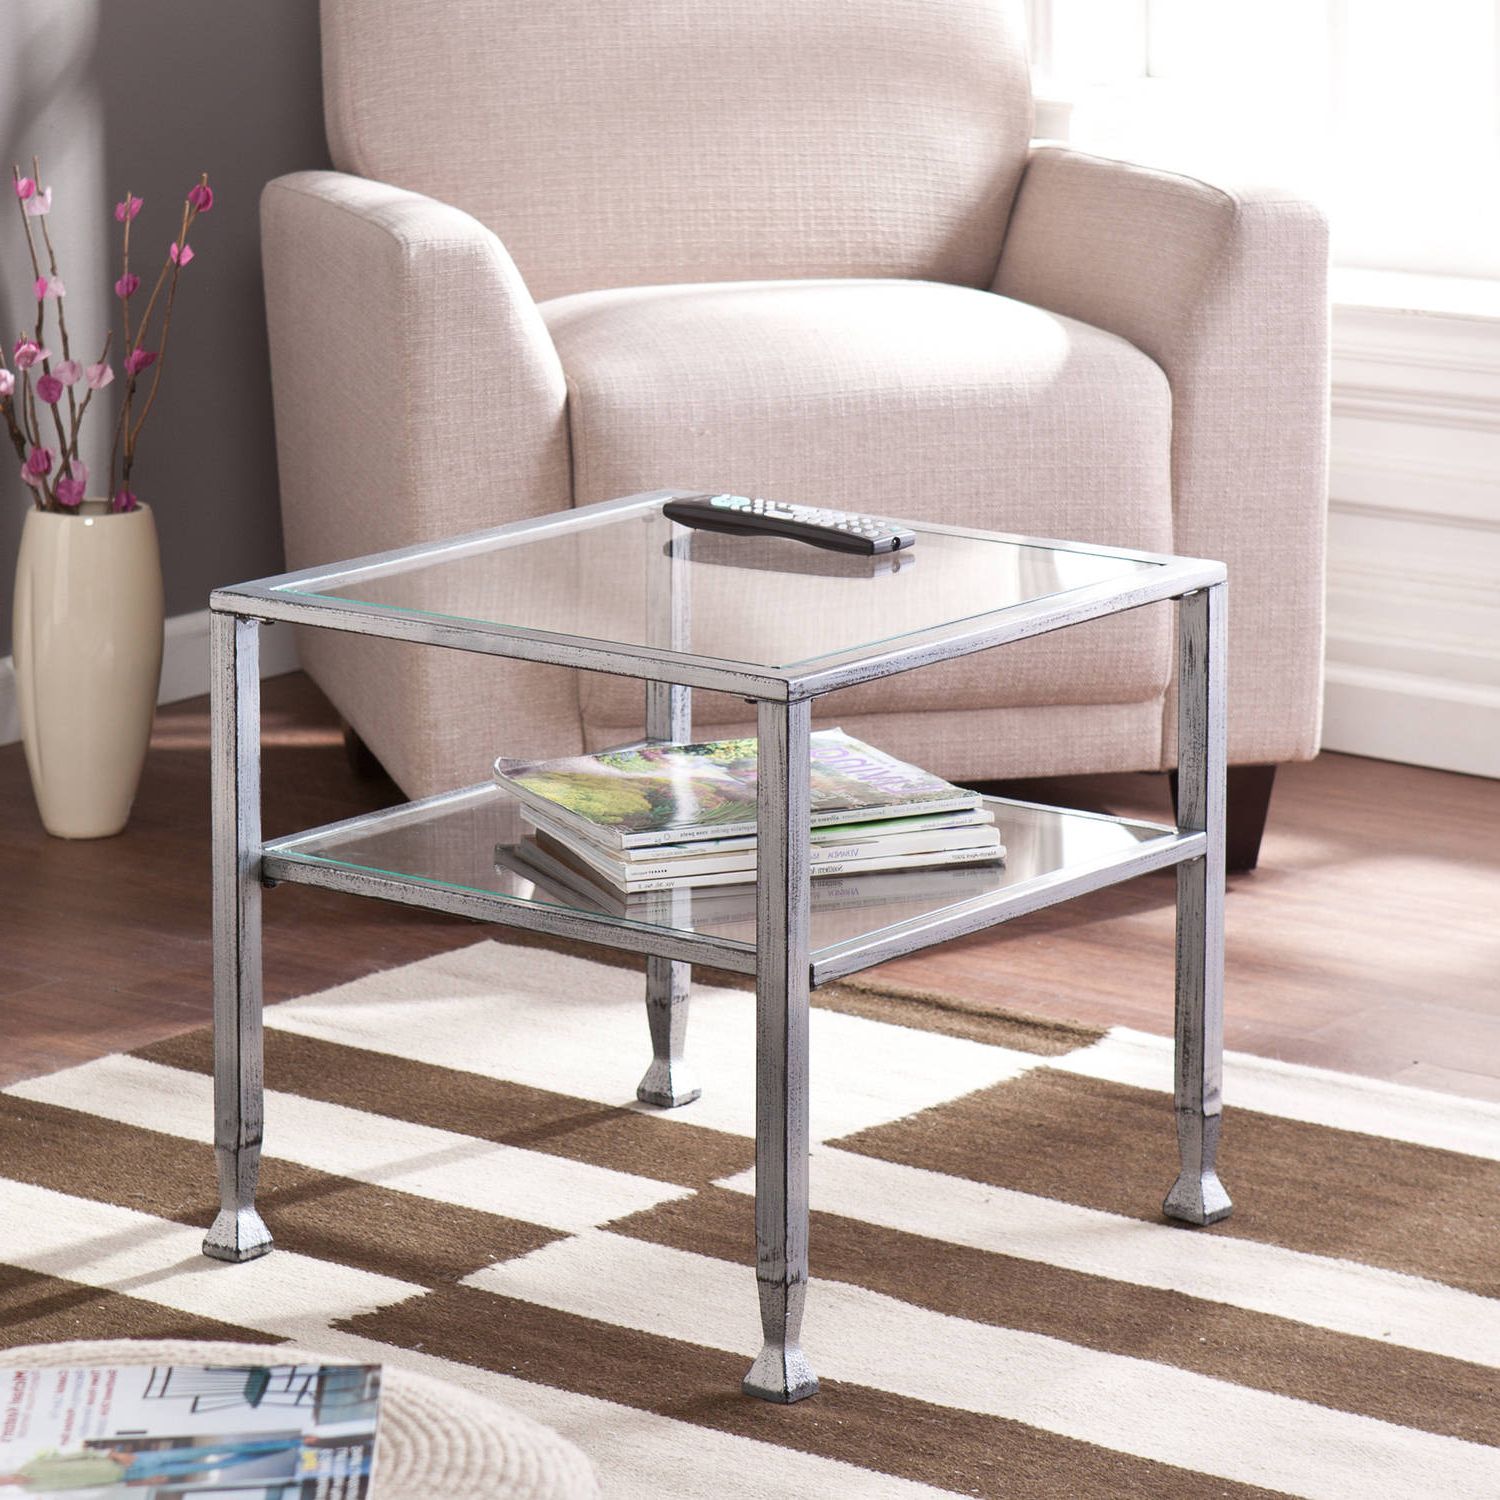 Blundell Metal/glass Cocktail Table, Silver With Black Pertaining To Preferred Antique Silver Aluminum Coffee Tables (View 14 of 20)